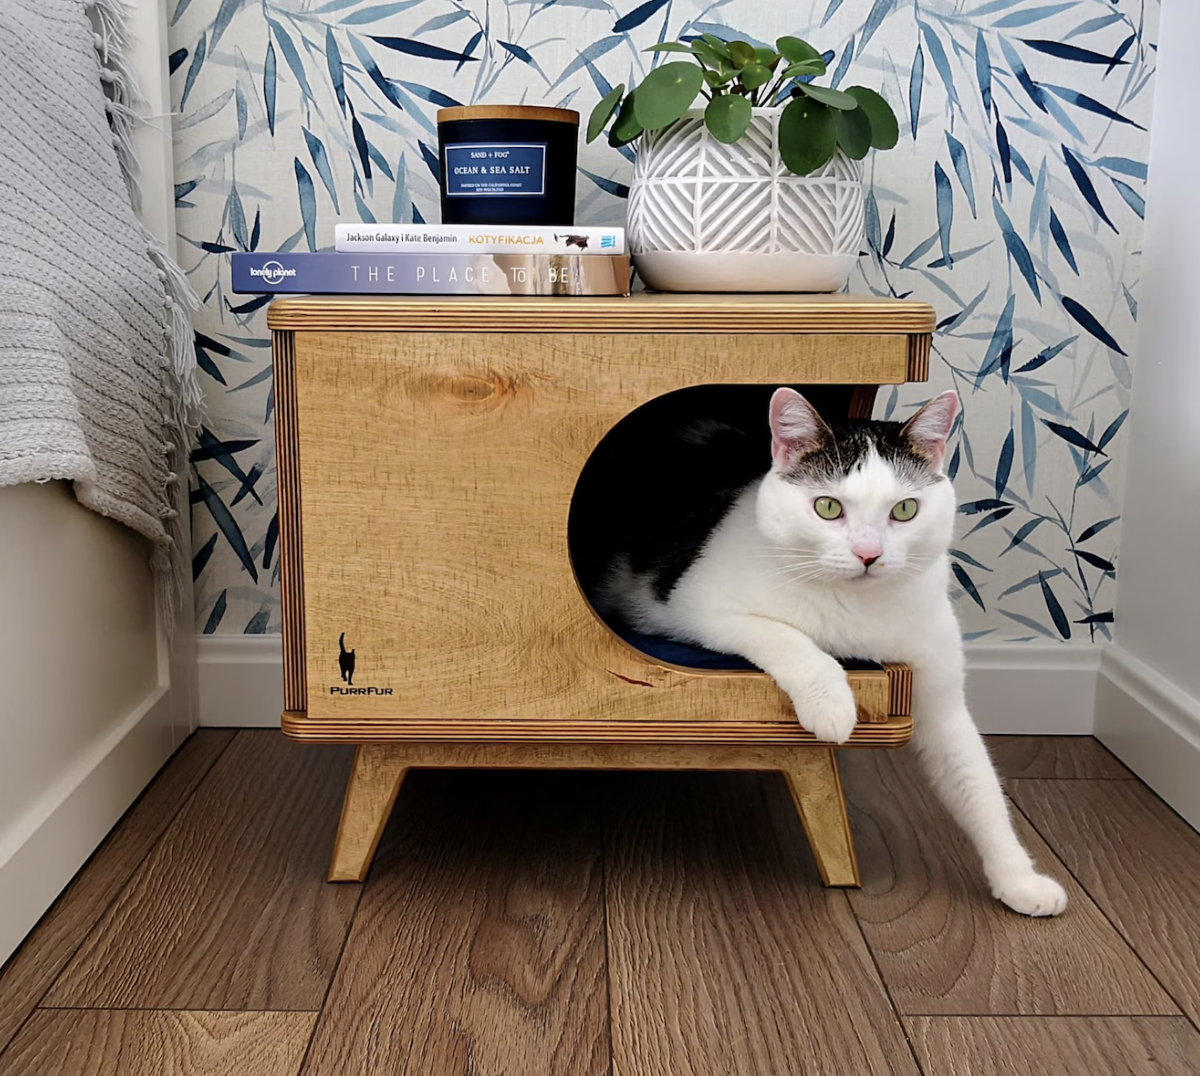 A light wooden cube-shaped side table has a hole on one corner to access a cat bed inside. A white and brown cat is lounging inside, and a plant and stack of books are placed on top.